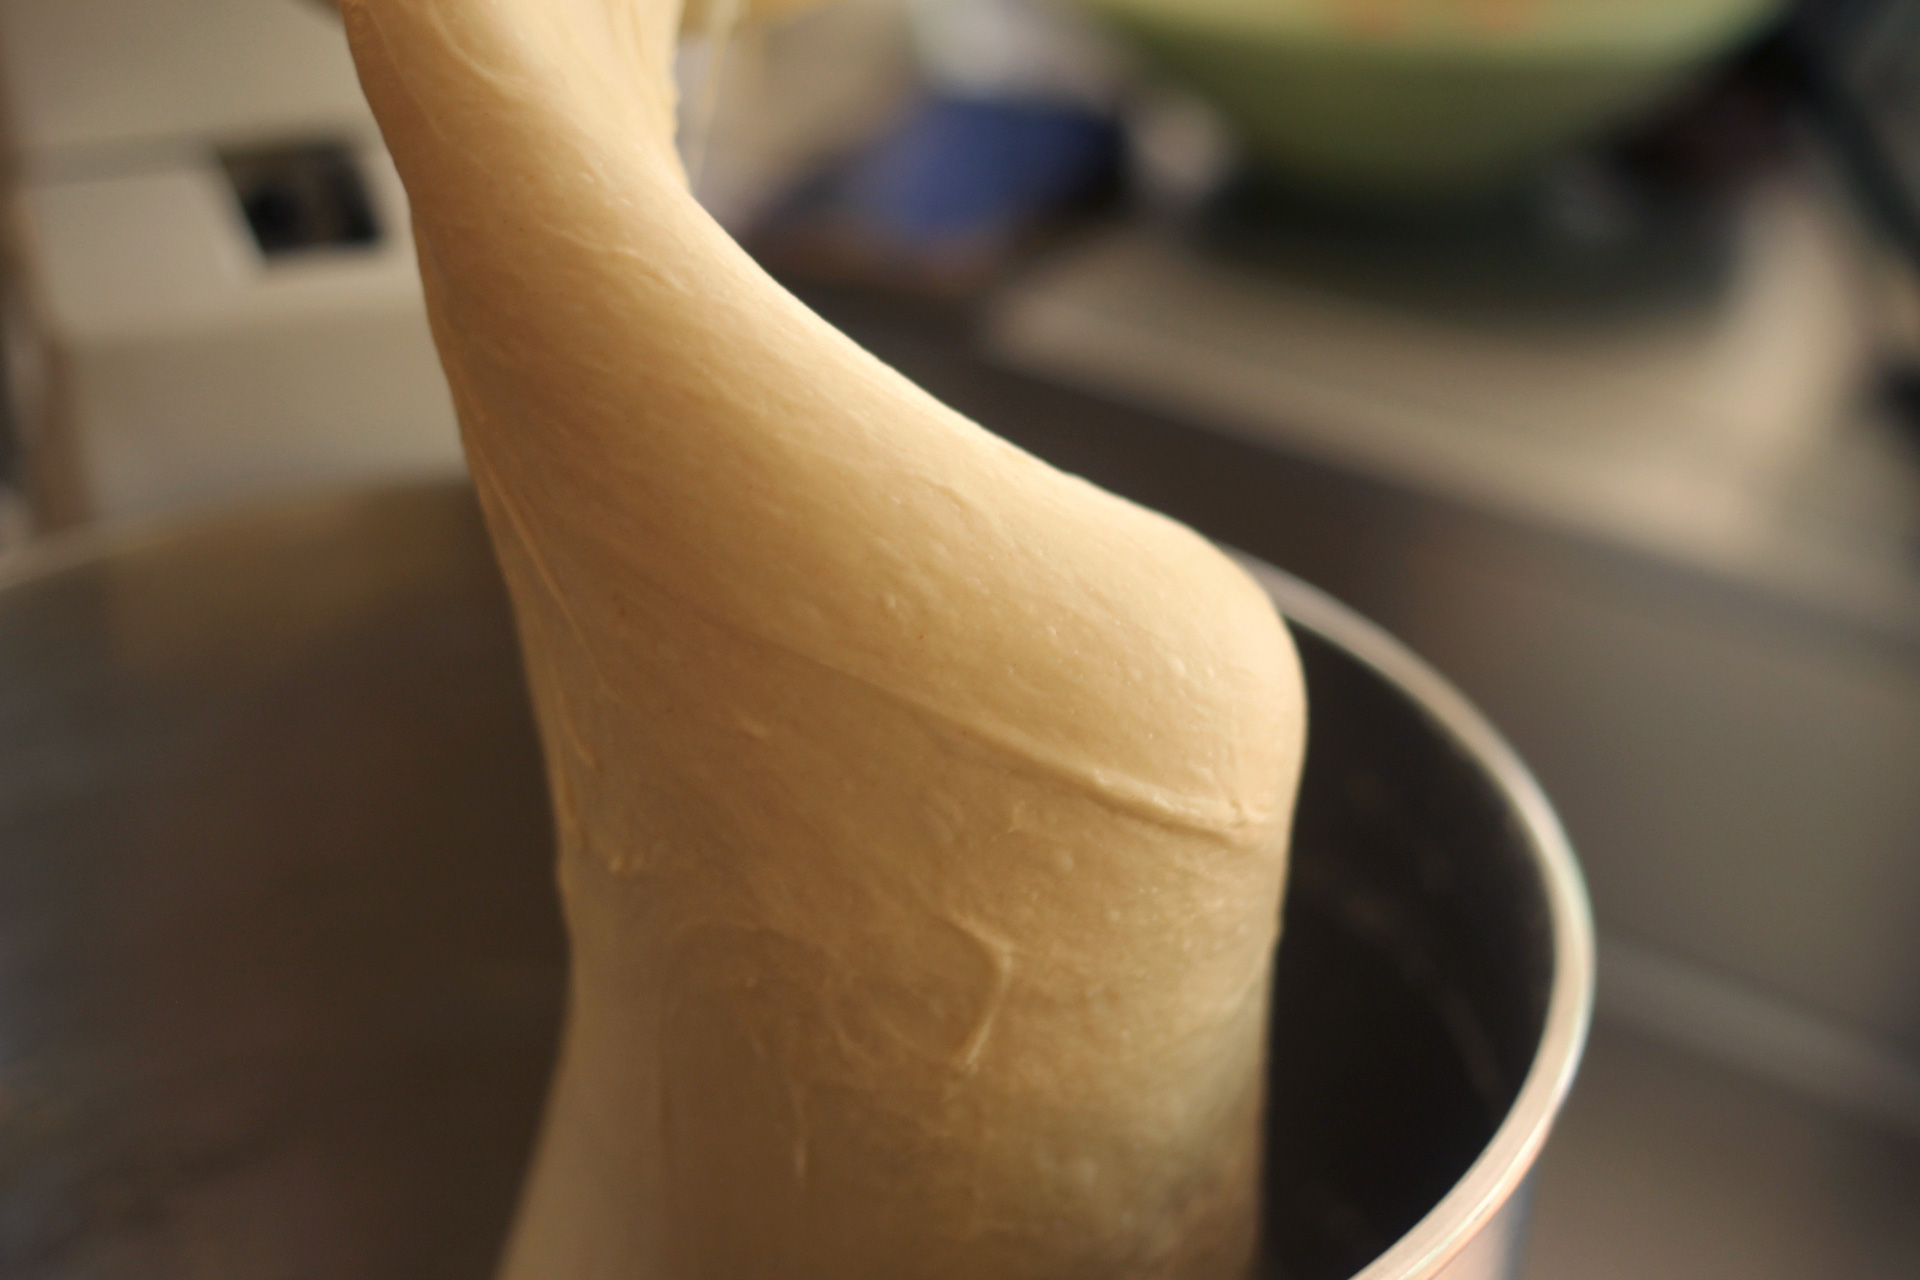 The fully kneaded dough should be smooth and stretchy.